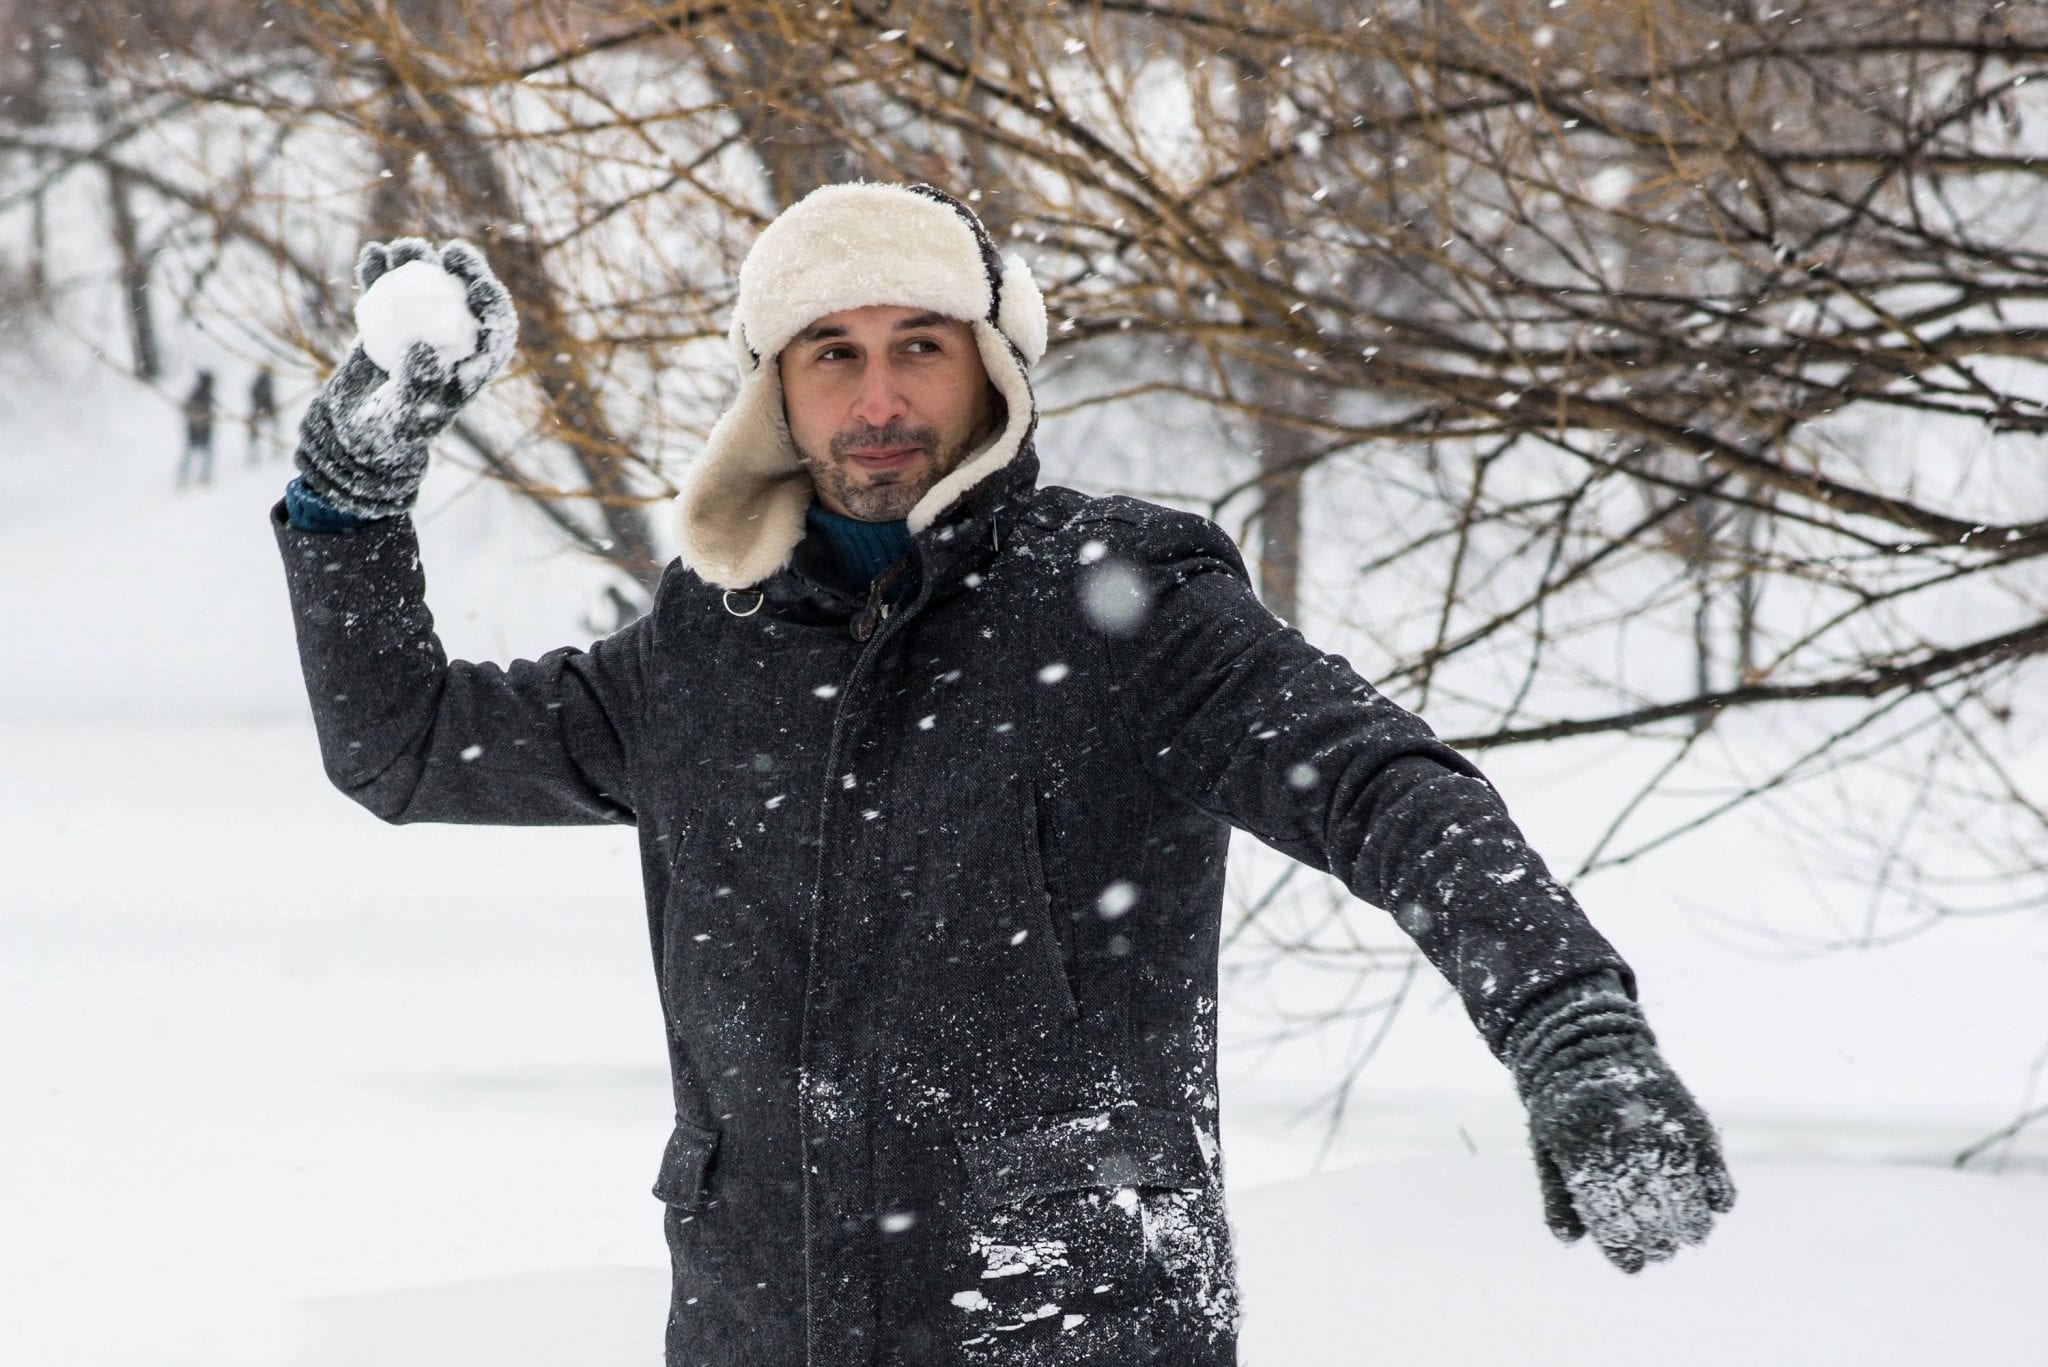 A man in extreme winter conditions, wrapped up in a coat, throwing a snowball